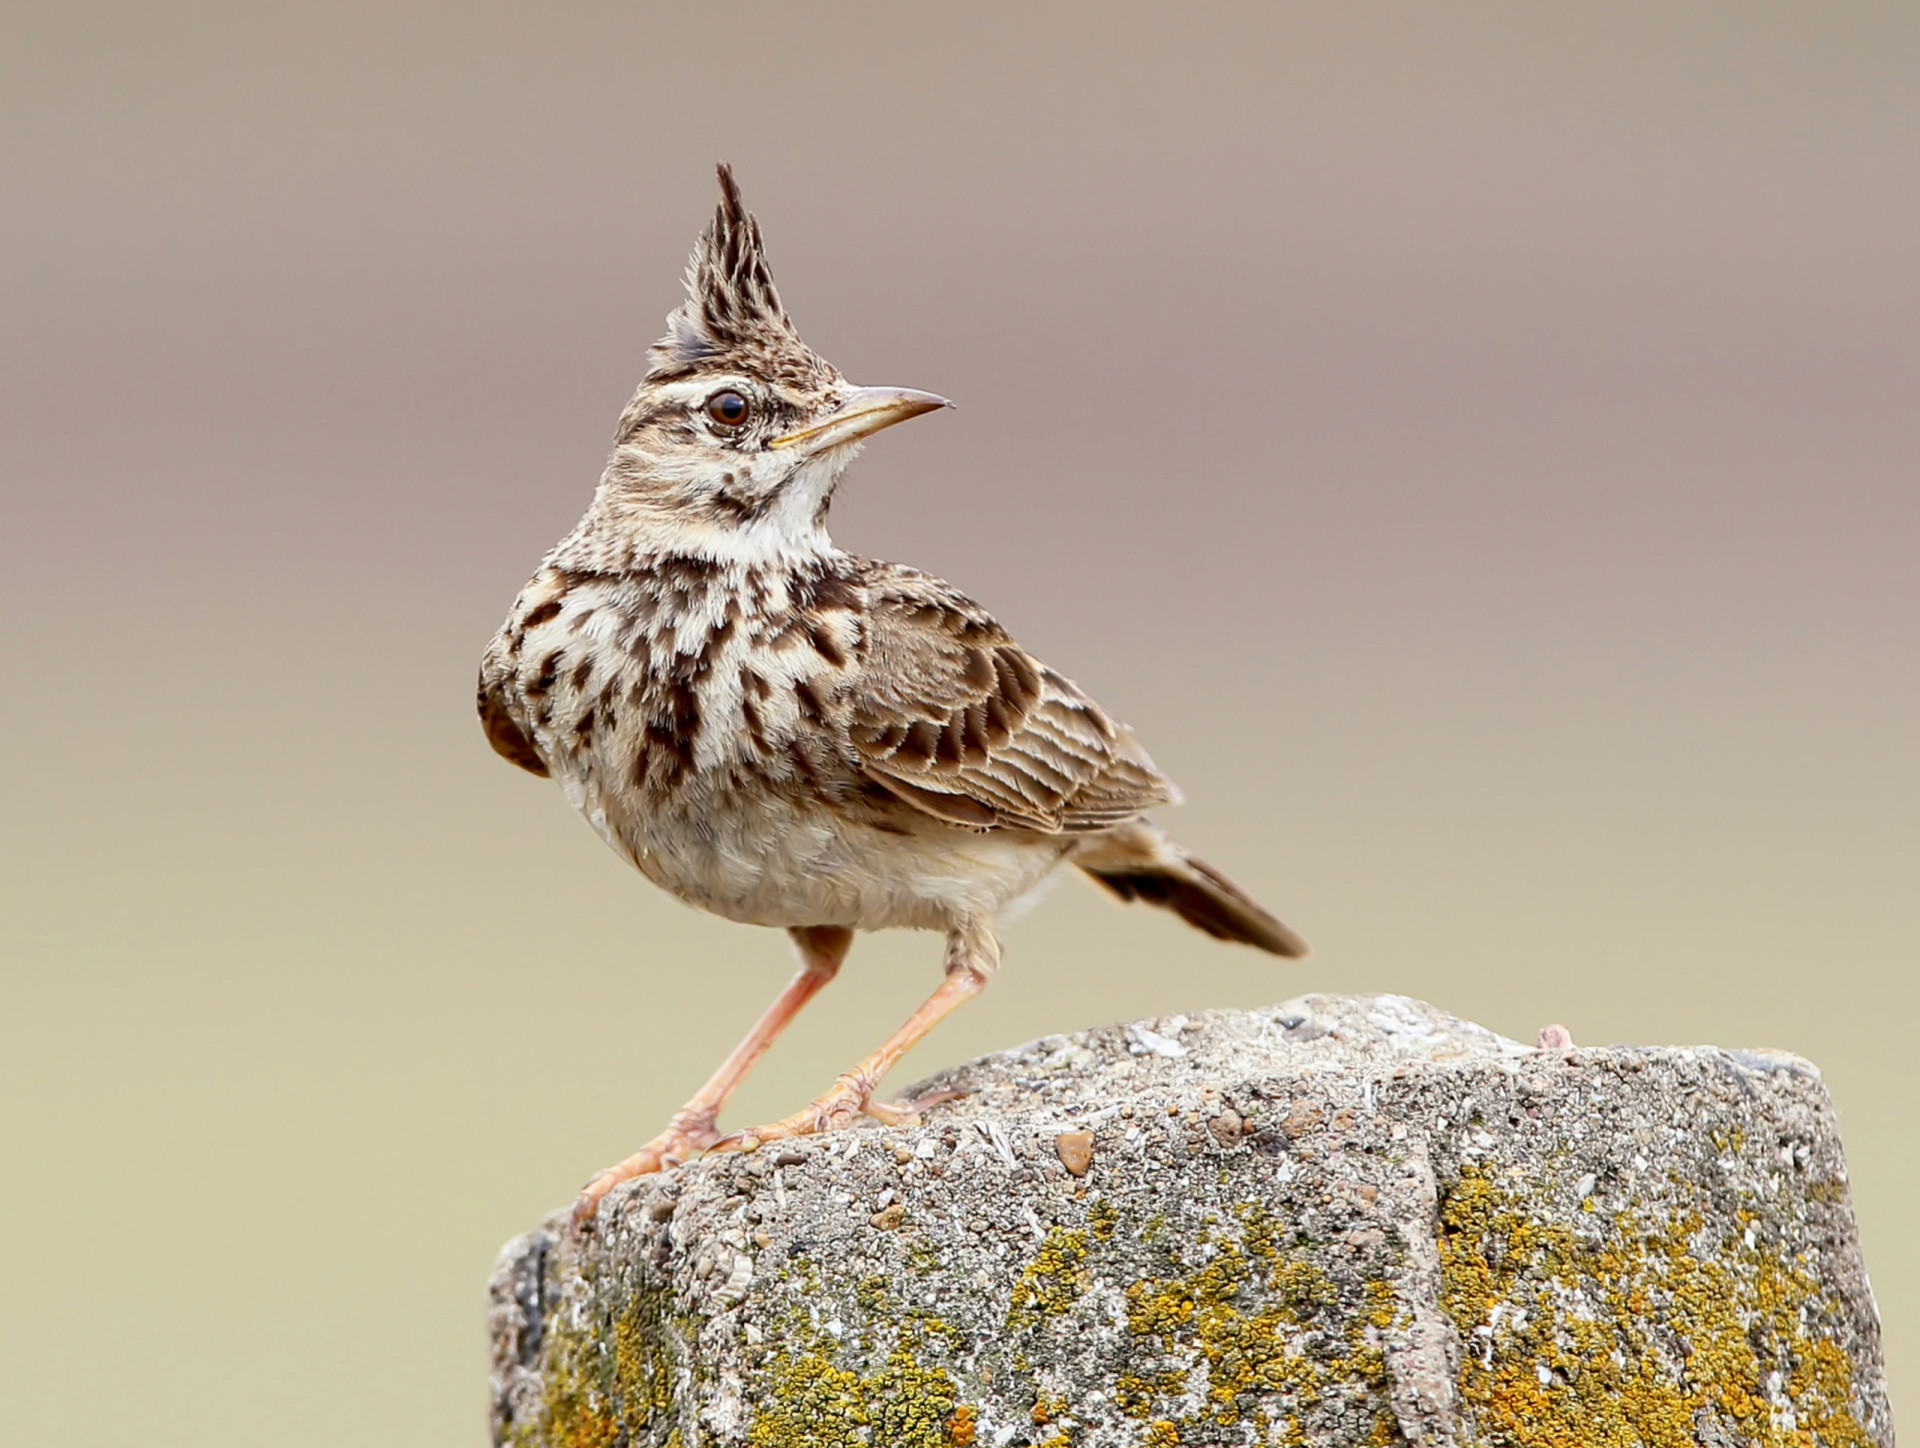 <p>Taberna's favorite songbird is the crested lark, whose vocalization is described as a liquid warbling. You'll most likely be regaled by this tiny songbird from high up in the sky.</p><p>You may also like:<a href="https://www.starsinsider.com/n/327172?utm_source=msn.com&utm_medium=display&utm_campaign=referral_description&utm_content=570754en-en"> "Italian" food that would make a real Italian cringe</a></p>